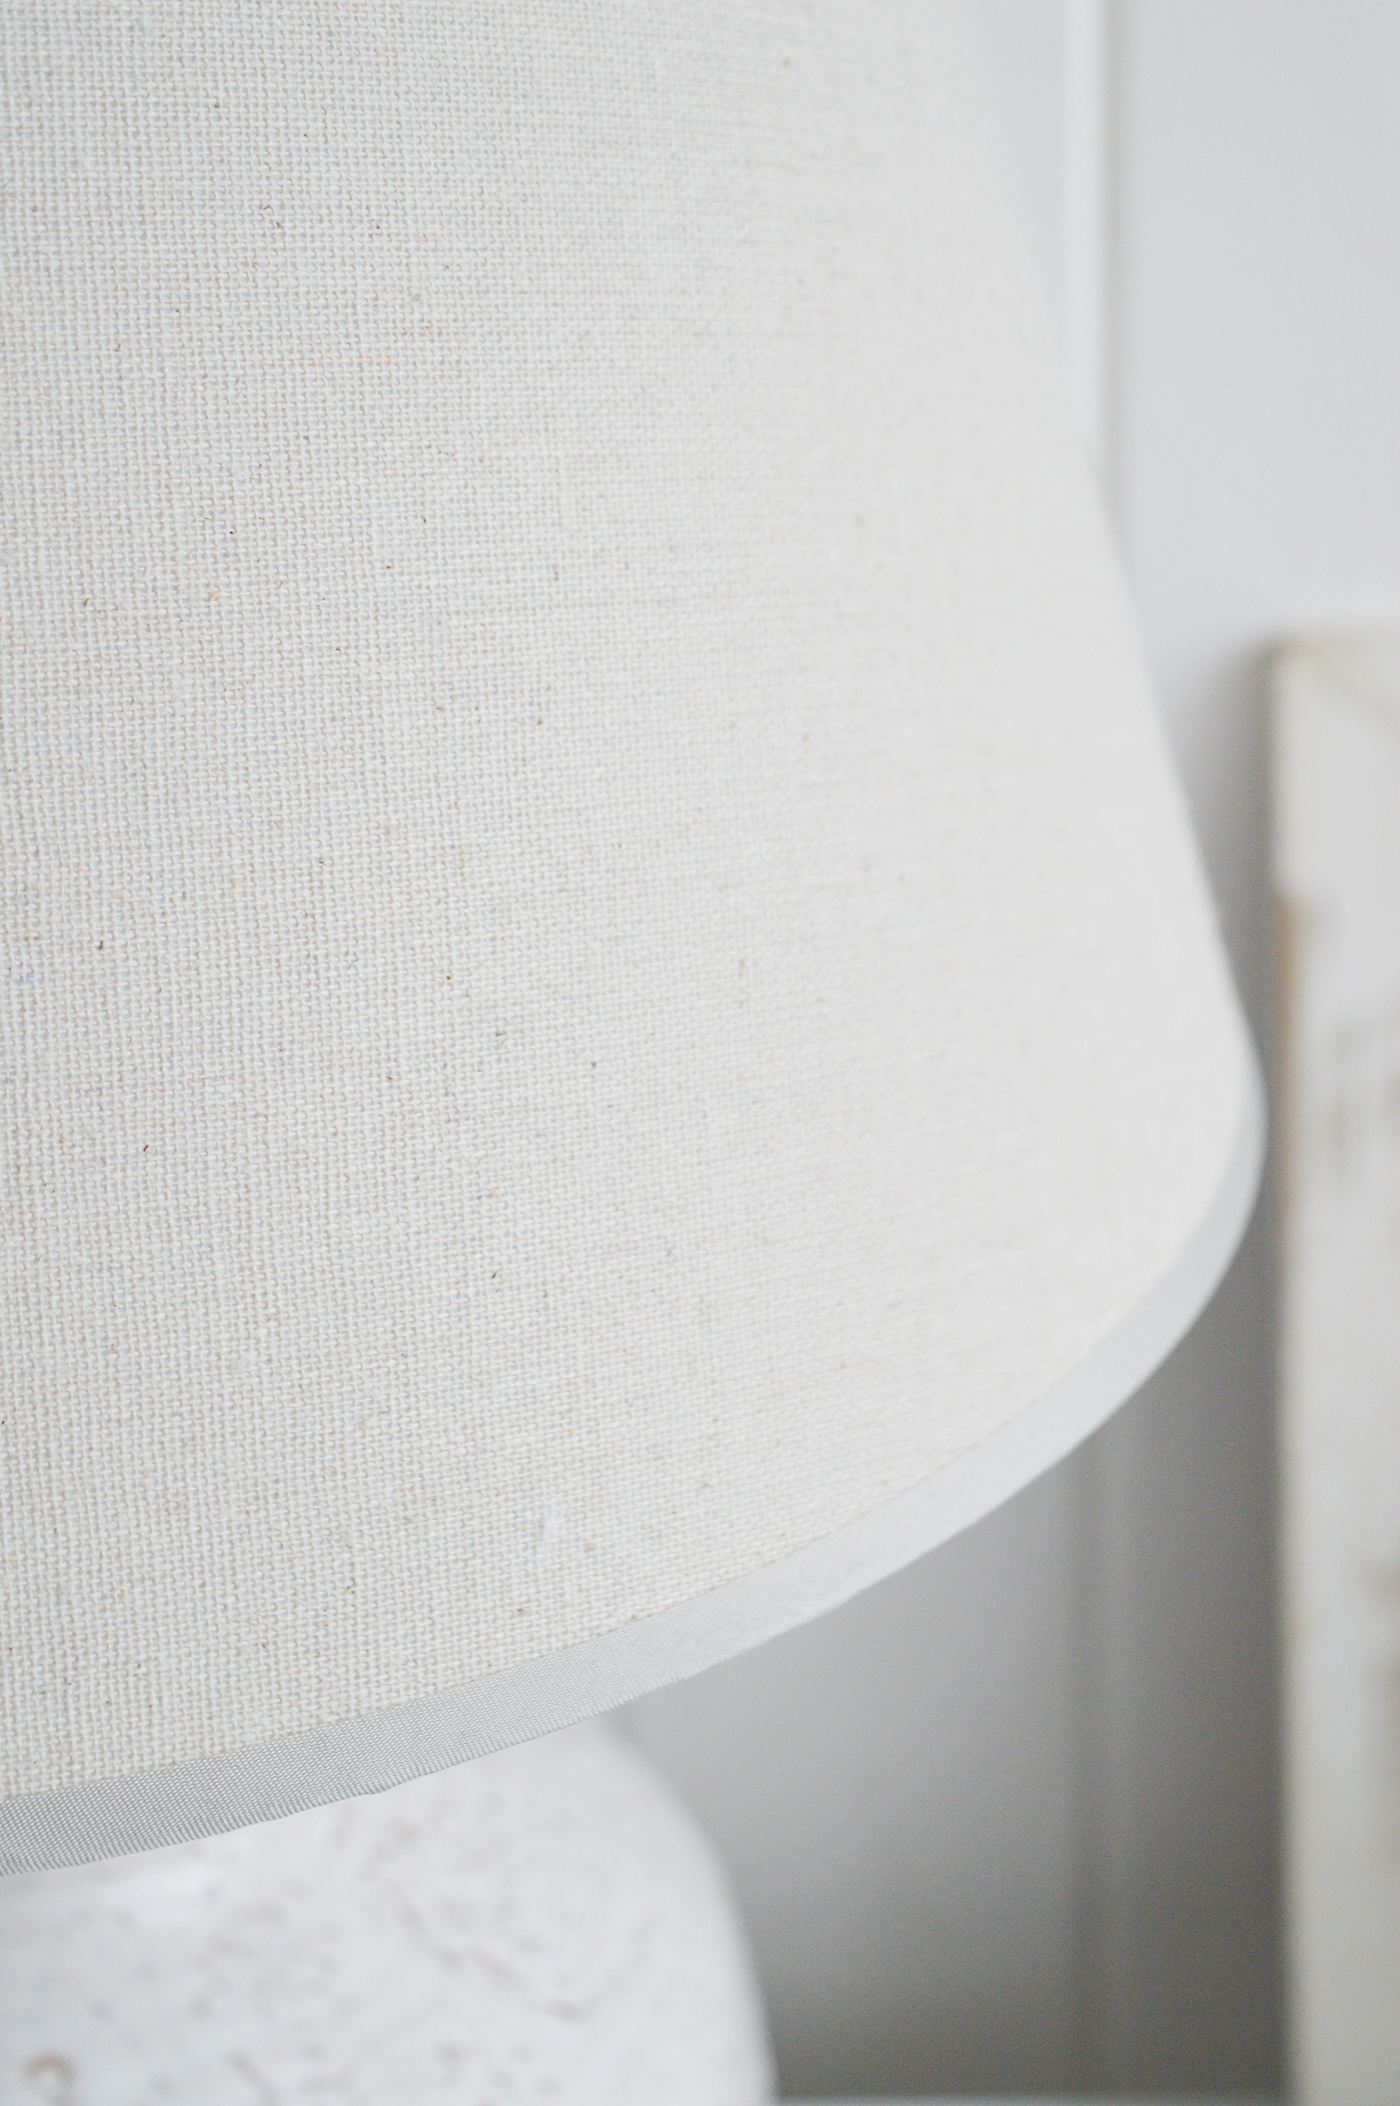 The White Compton white ceramic lamp with a glazed finish for for white interiors